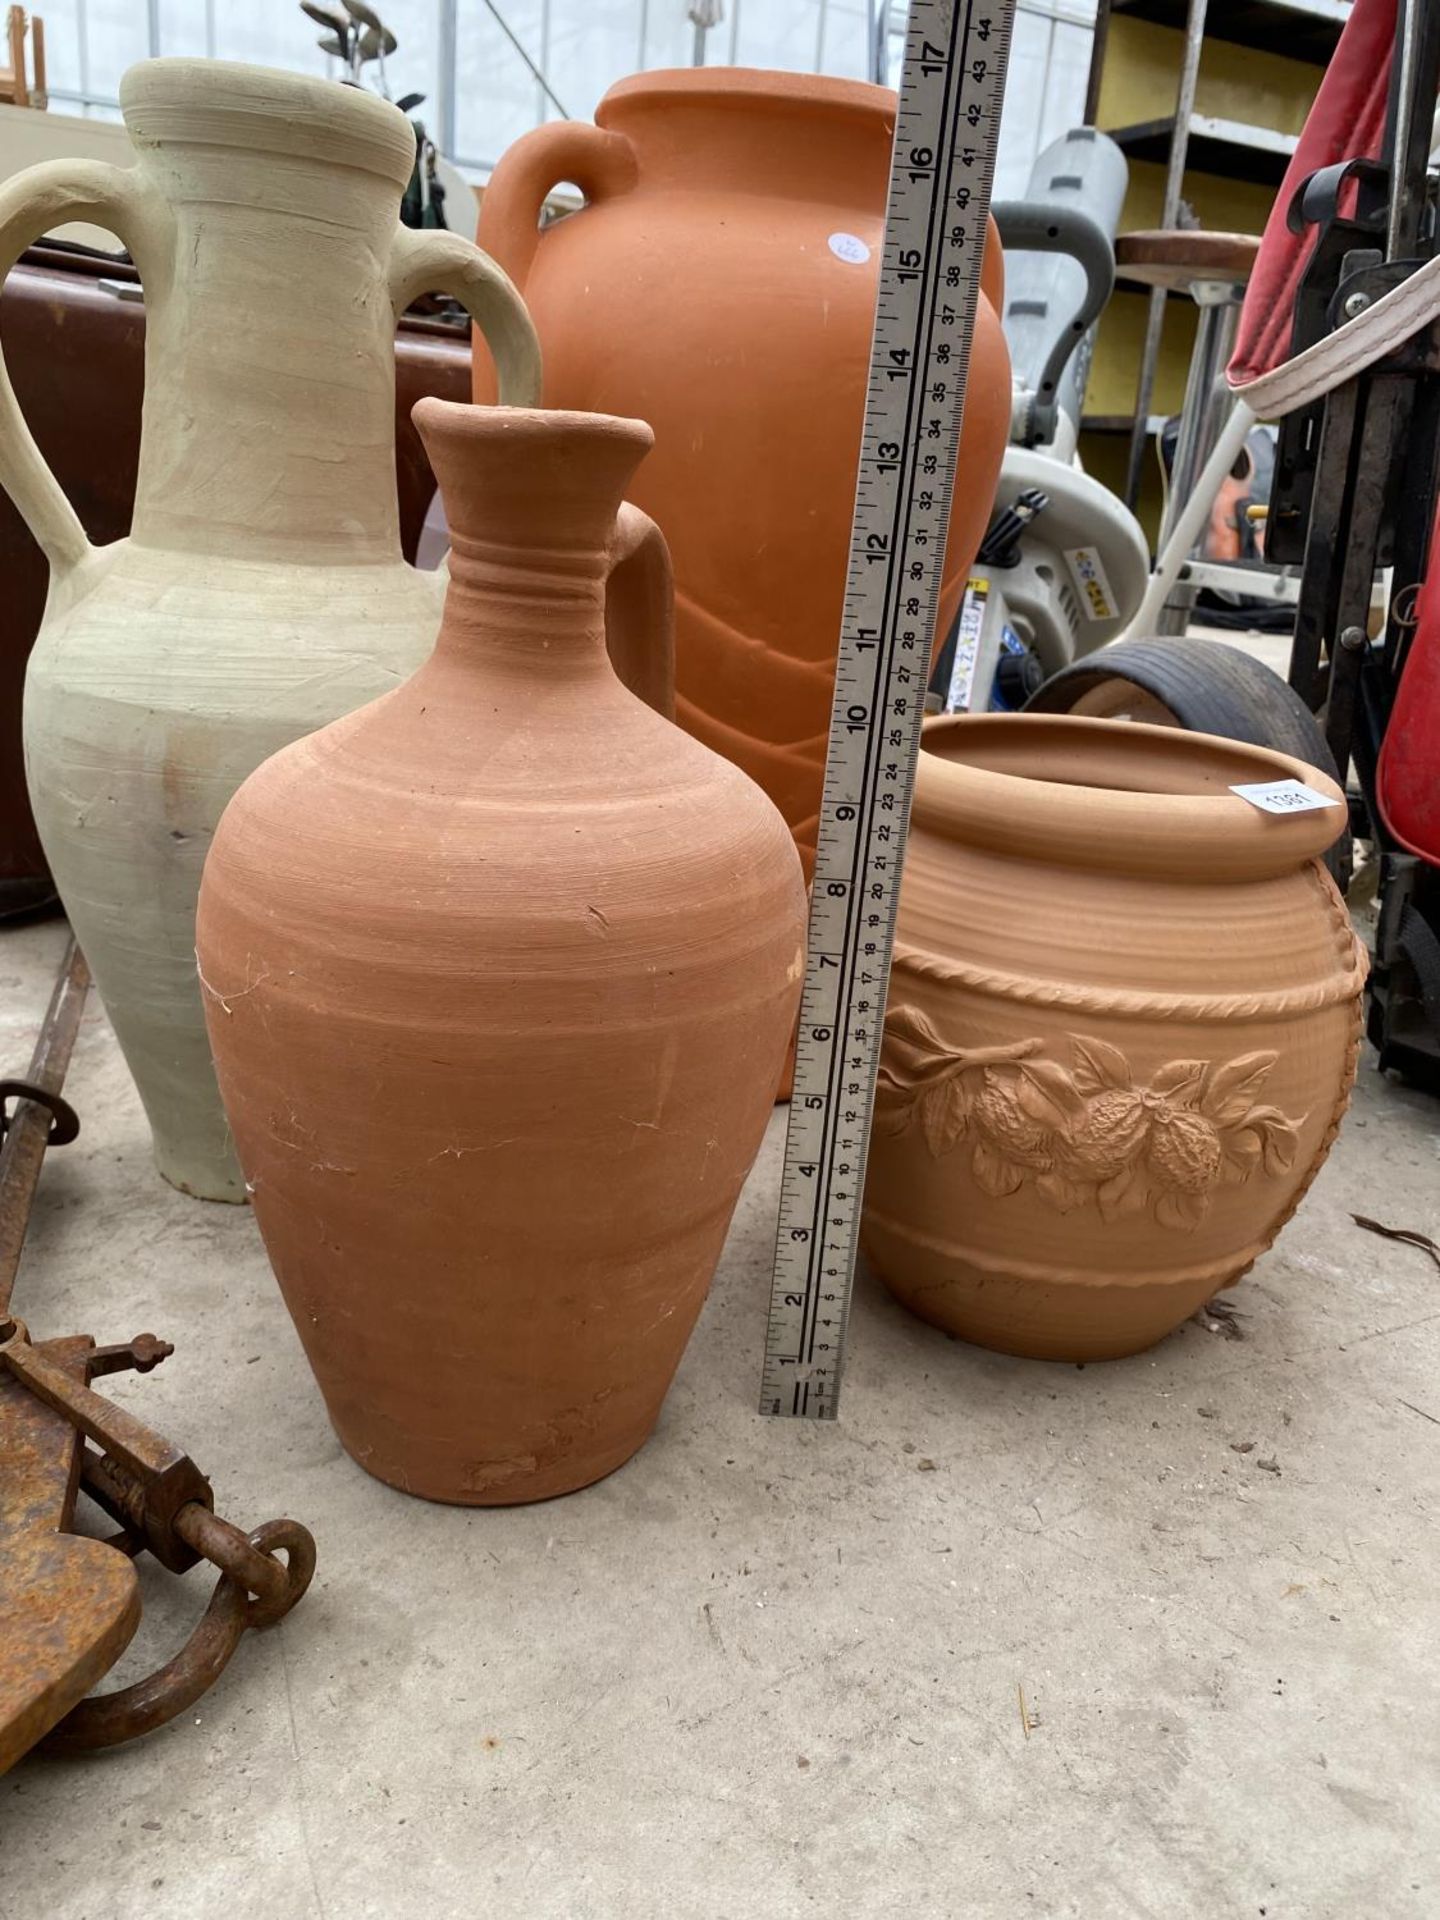 A TERRACOTTA PLANTER, A TERRACOTTA JUG AND TWO TERRACOTTA URNS - Image 4 of 4